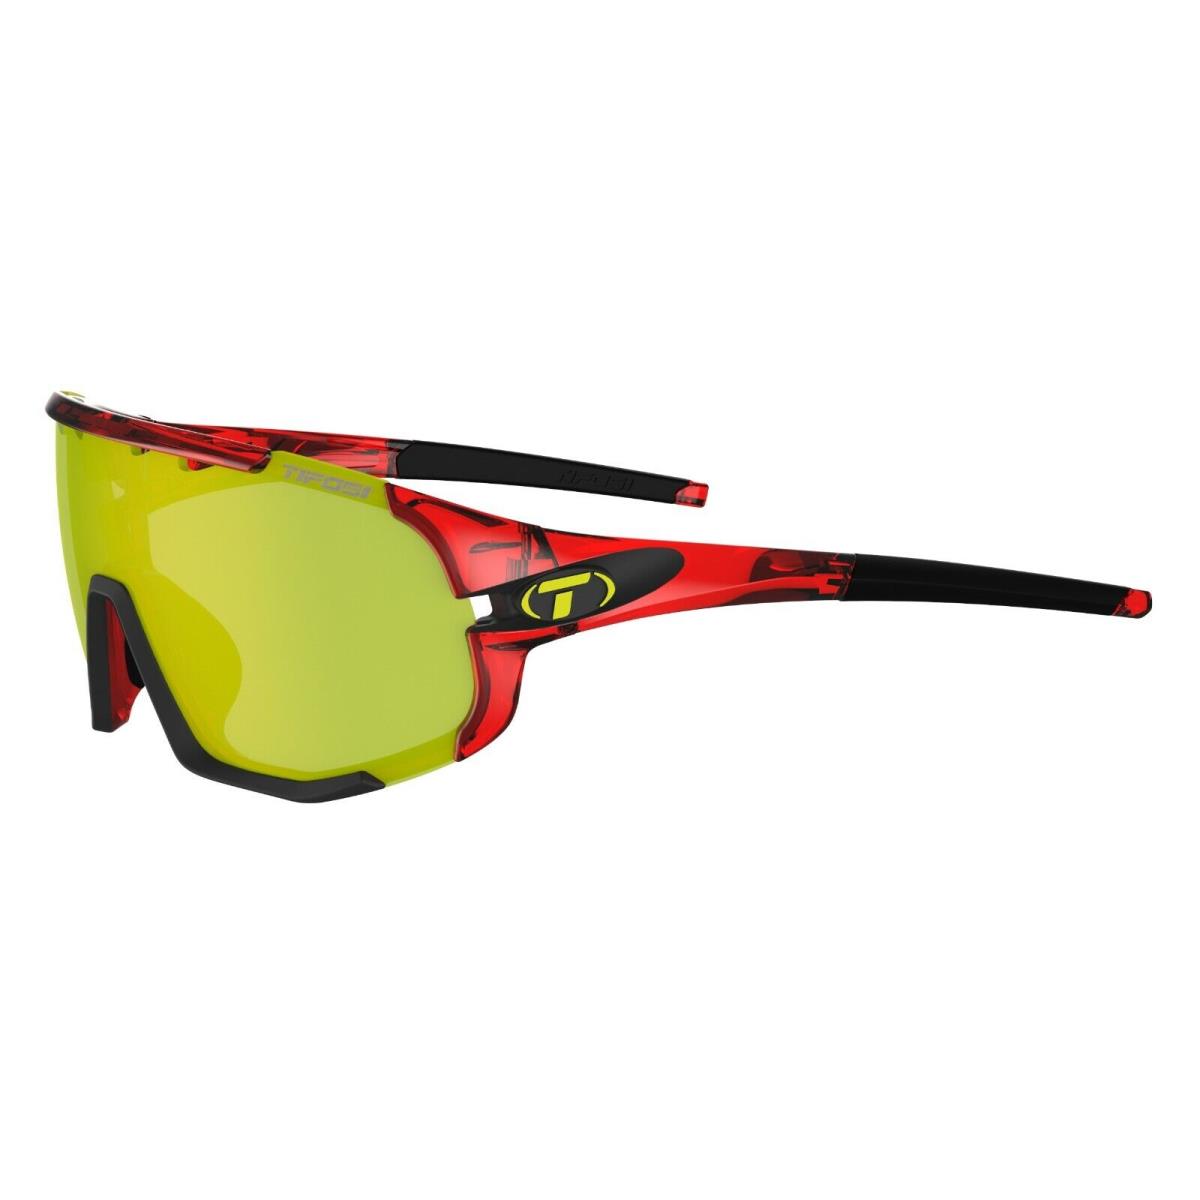 Tifosi Sledge Black White Orange Red Sunglasses Choose Your Style Red Clarion Yellow CYCLING